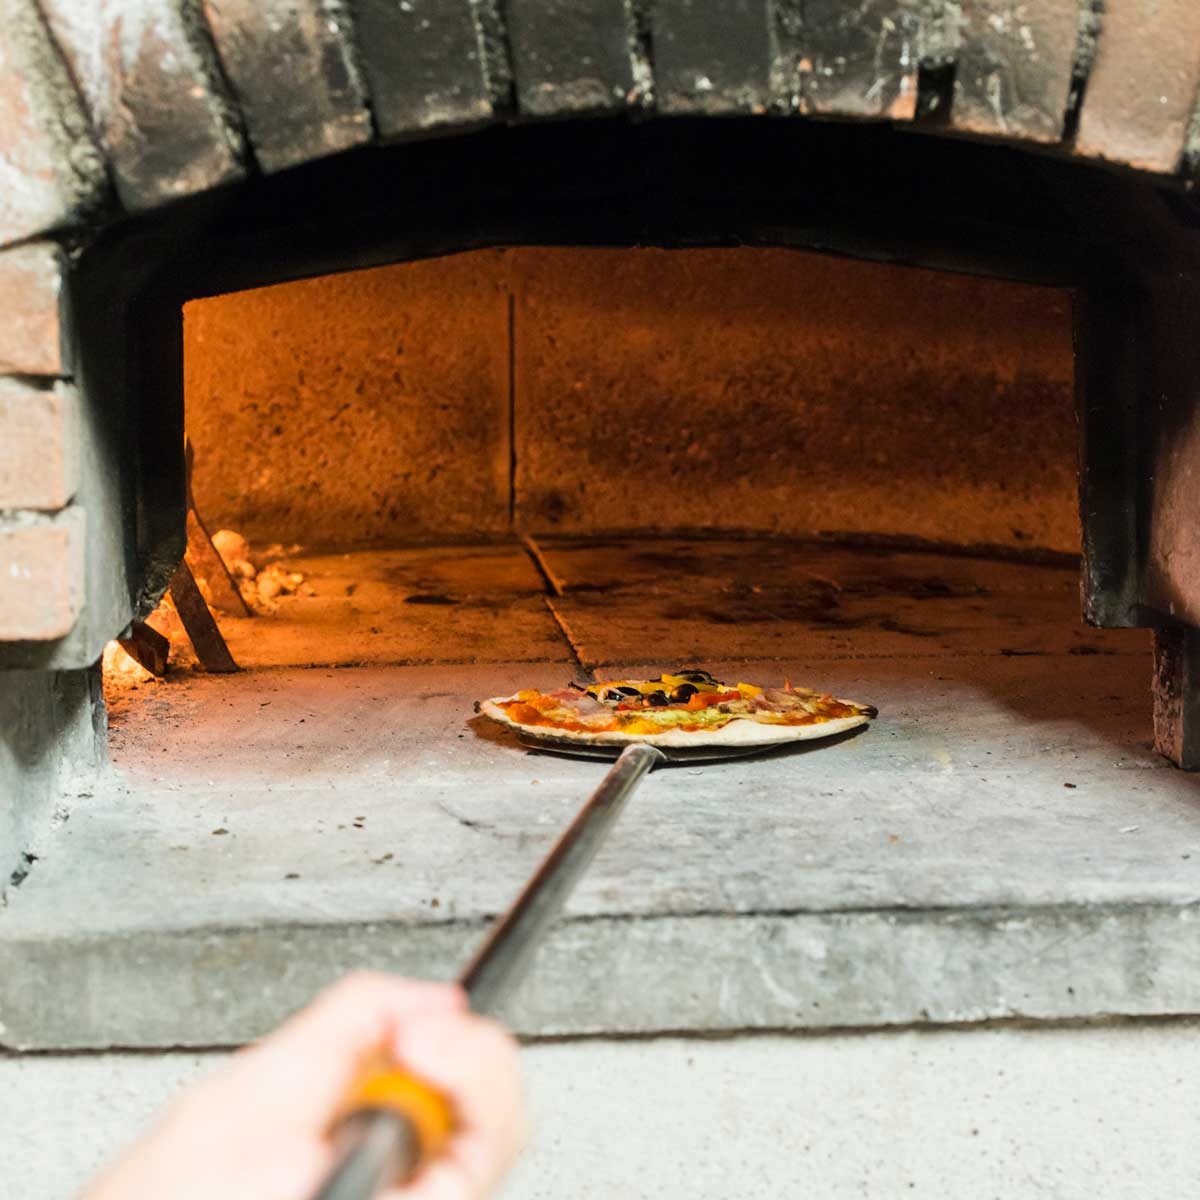 How to Properly Clean an Outdoor Pizza Oven